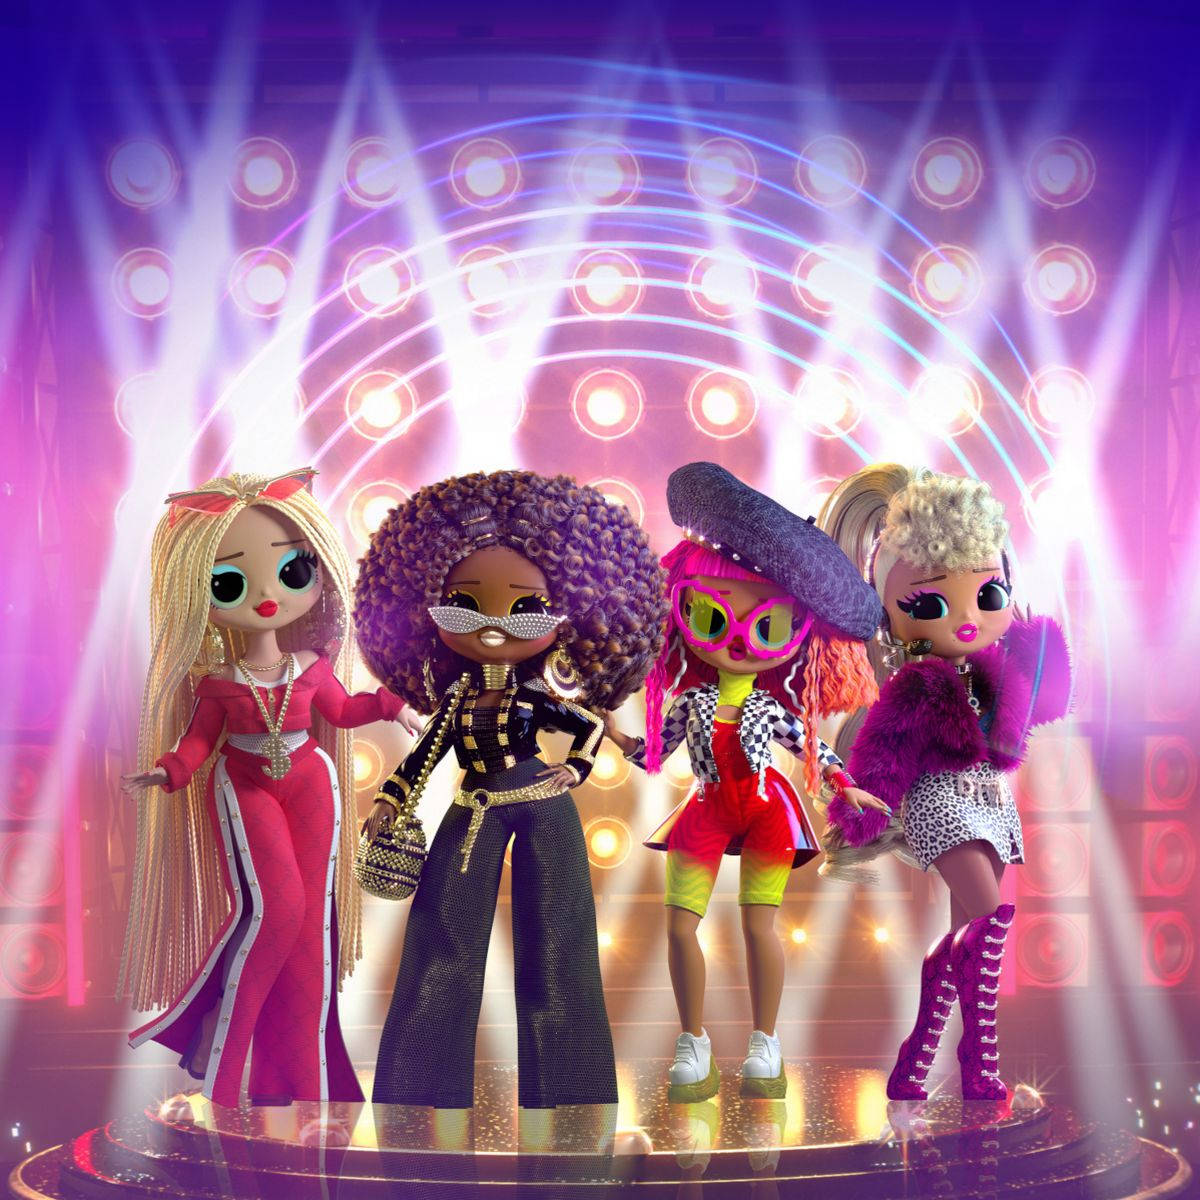 Download Fabulous LOL Dolls On Stage Wallpaper | Wallpapers.com